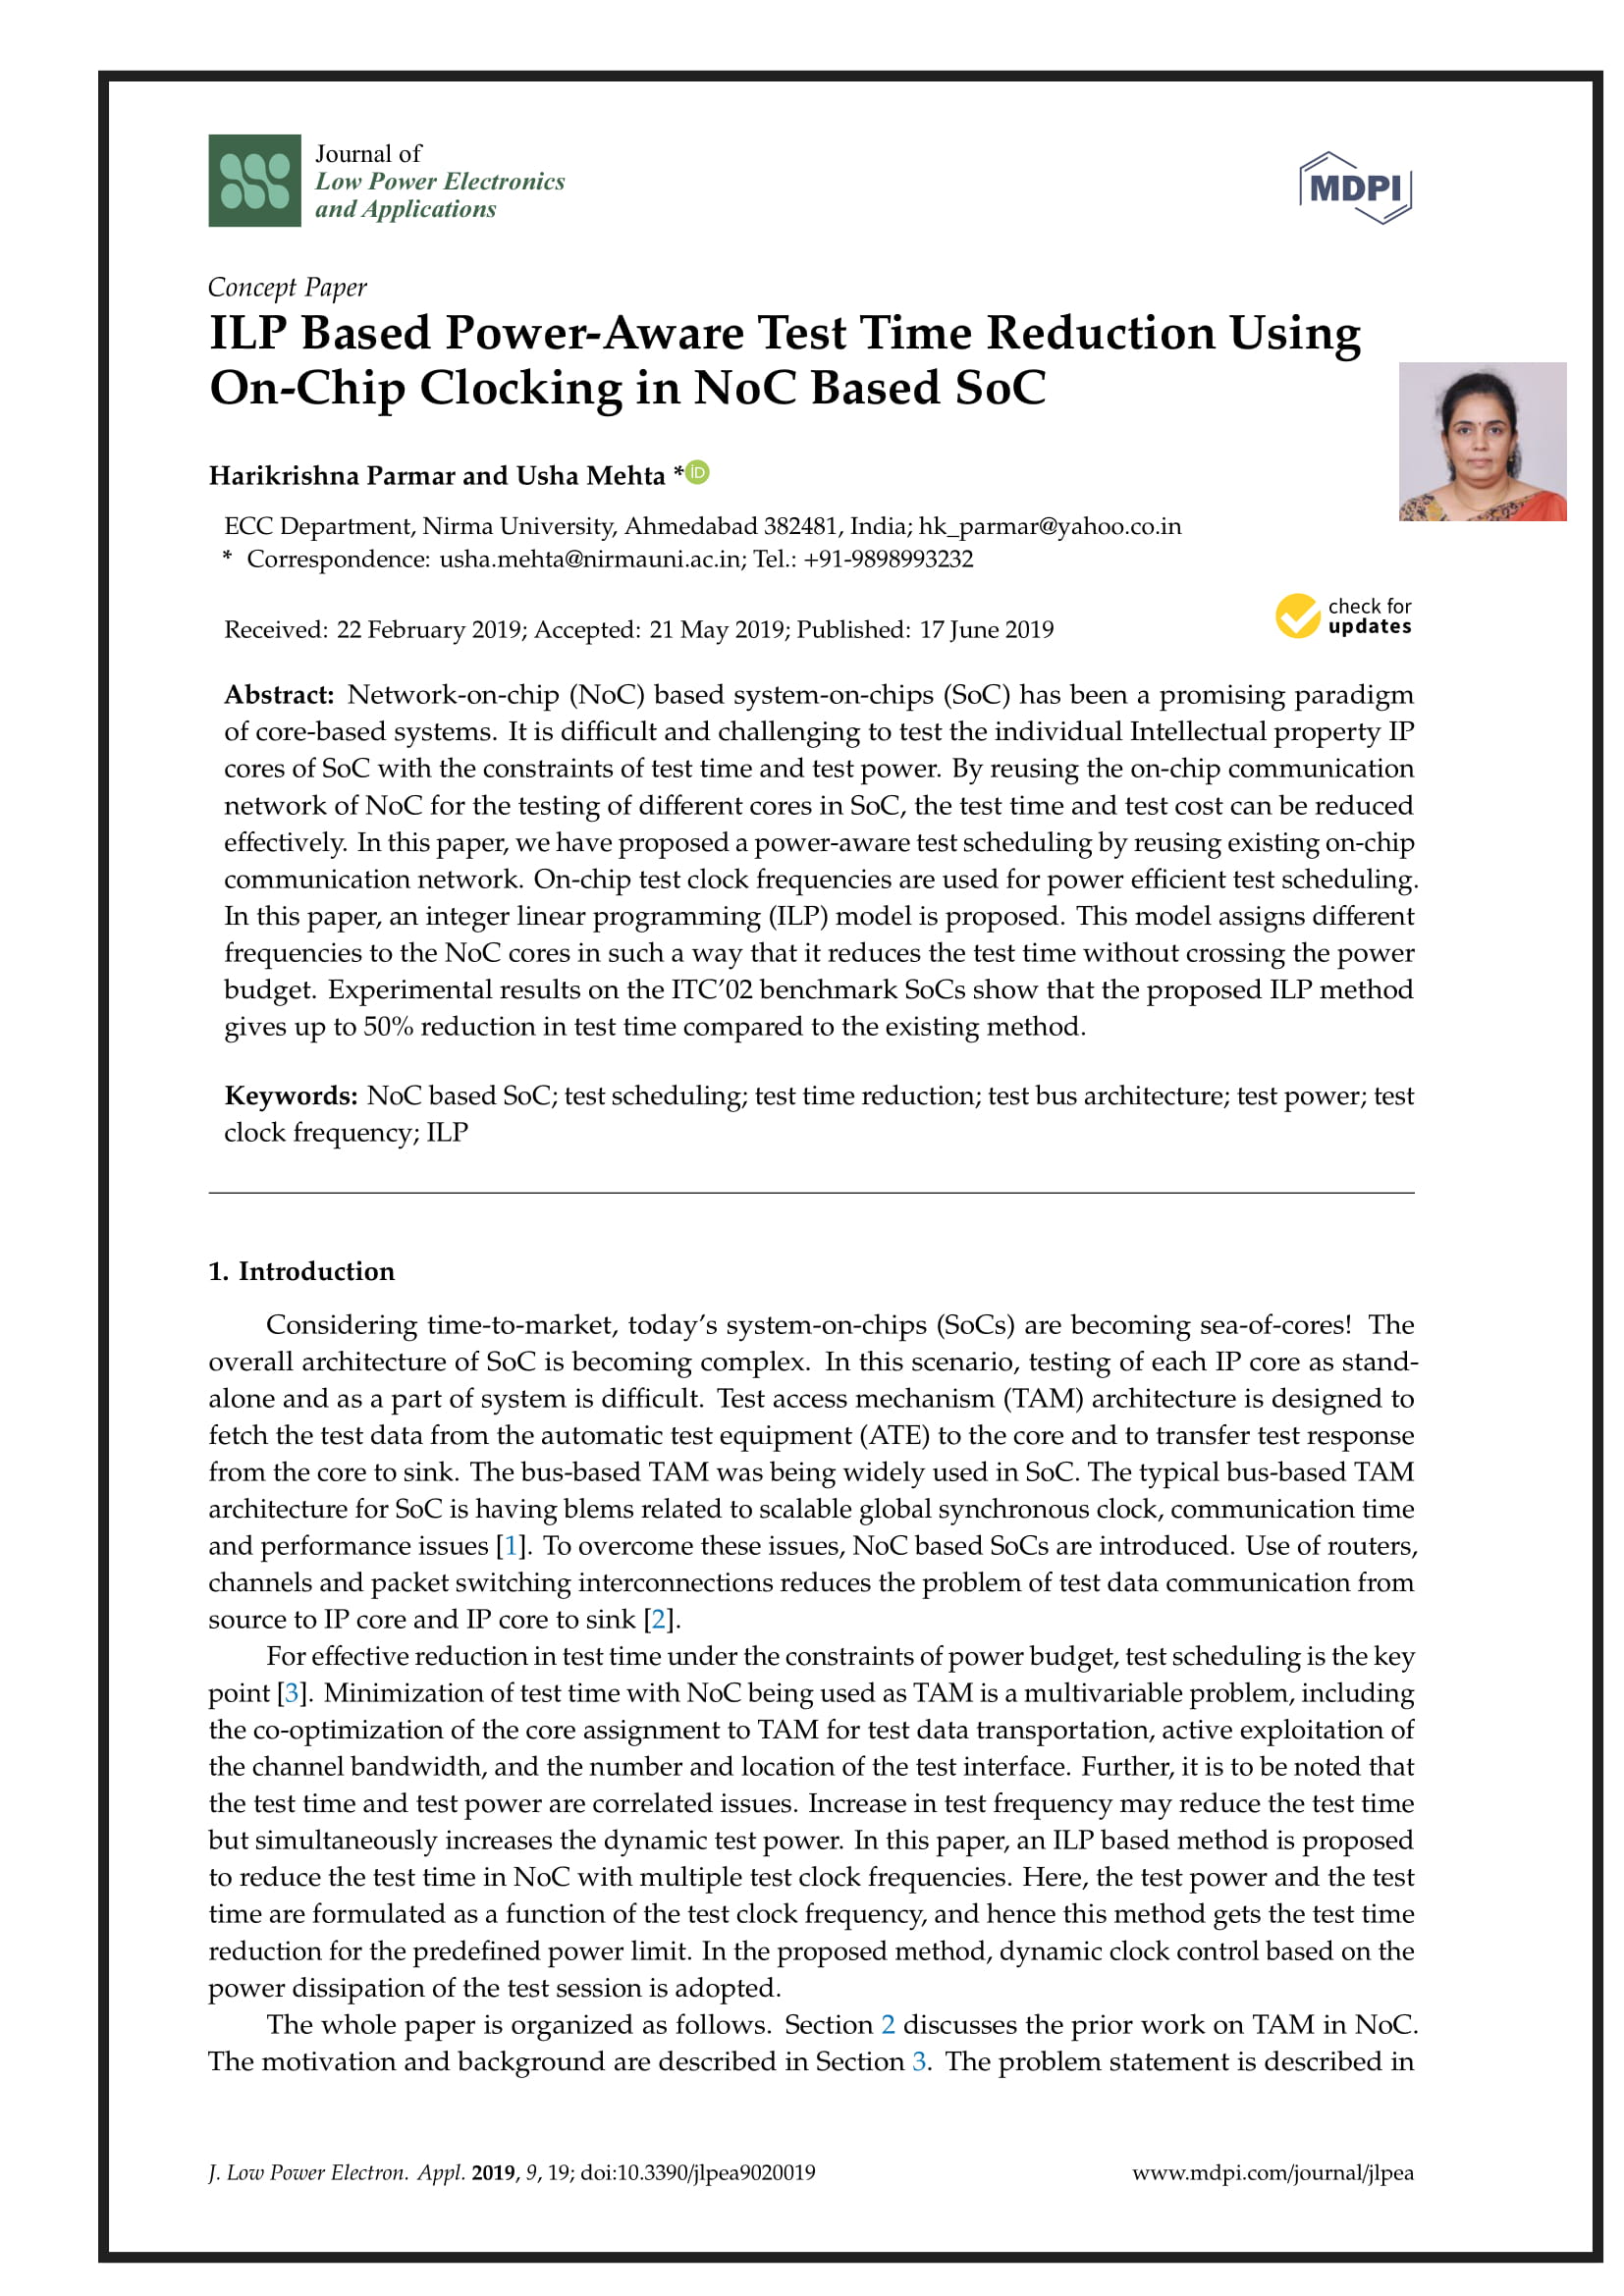 ILP Based Power-Aware Test Time Reduction Using On-Chip Clocking in NoC Based SoC